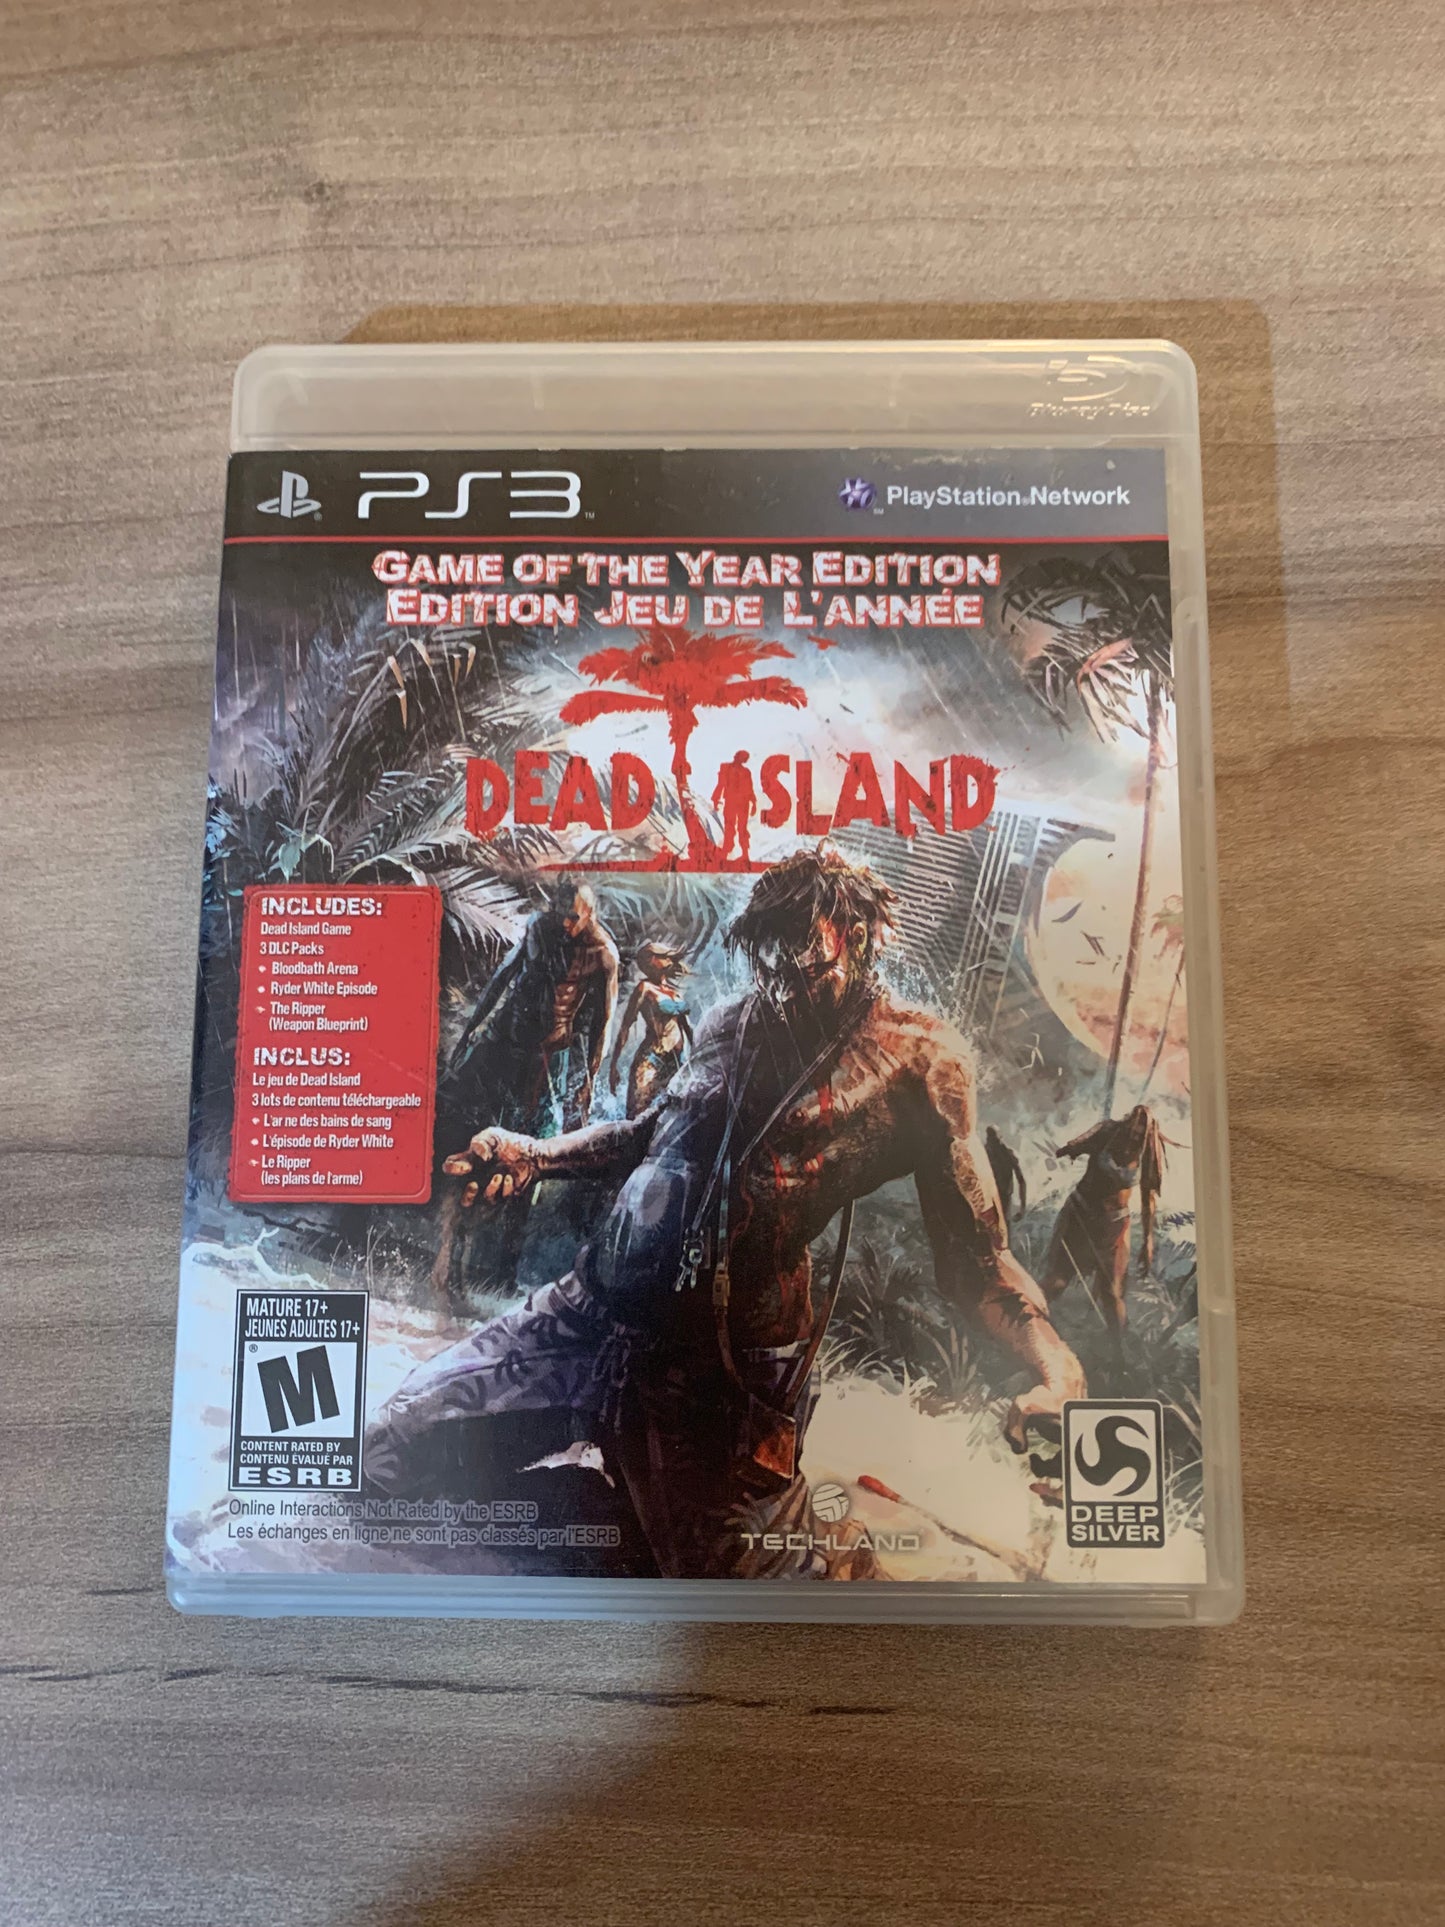 SONY PLAYSTATiON 3 [PS3] | DEAD iSLAND | GAME OF THE YEAR EDiTiON